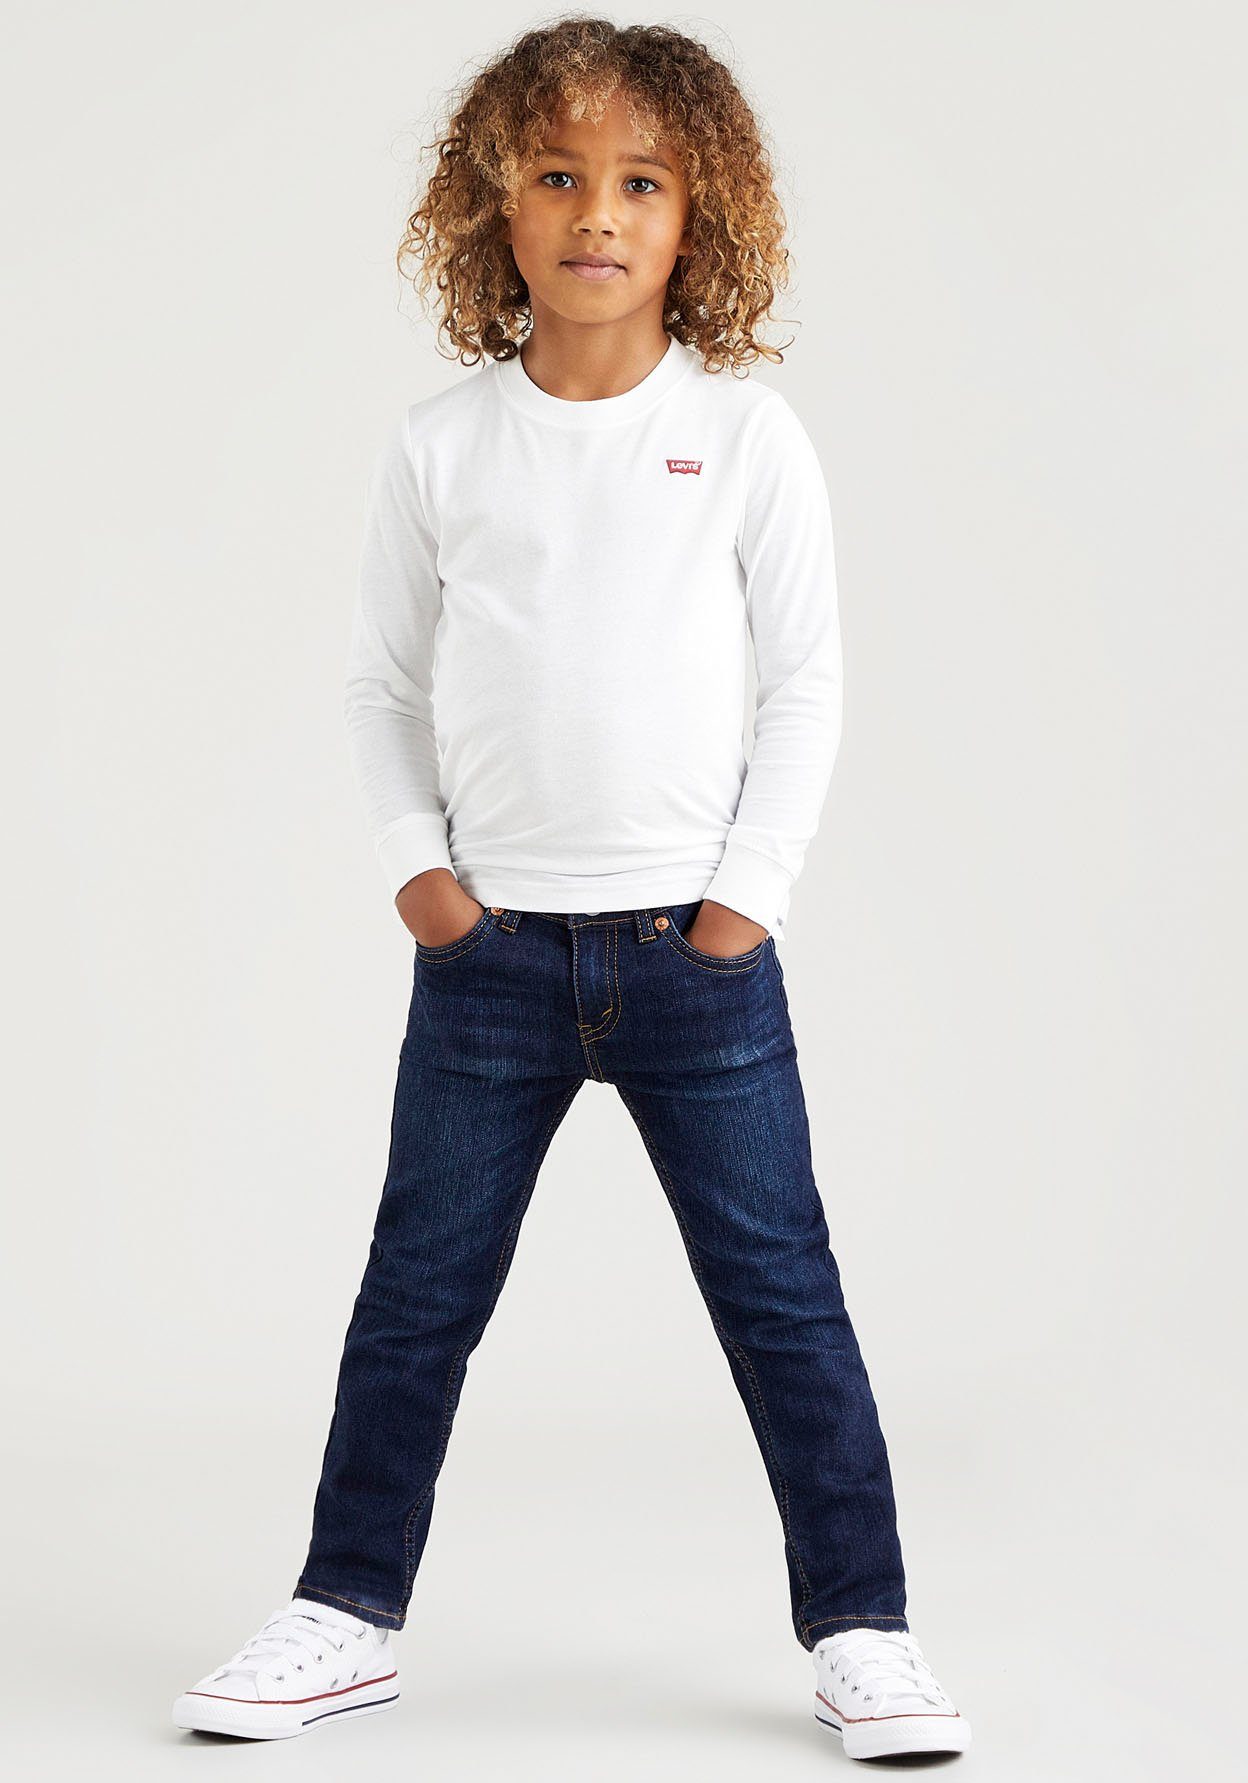 BATWING weiß Levi's® TEE Kids L/S BOYS for CHESTHIT Langarmshirt